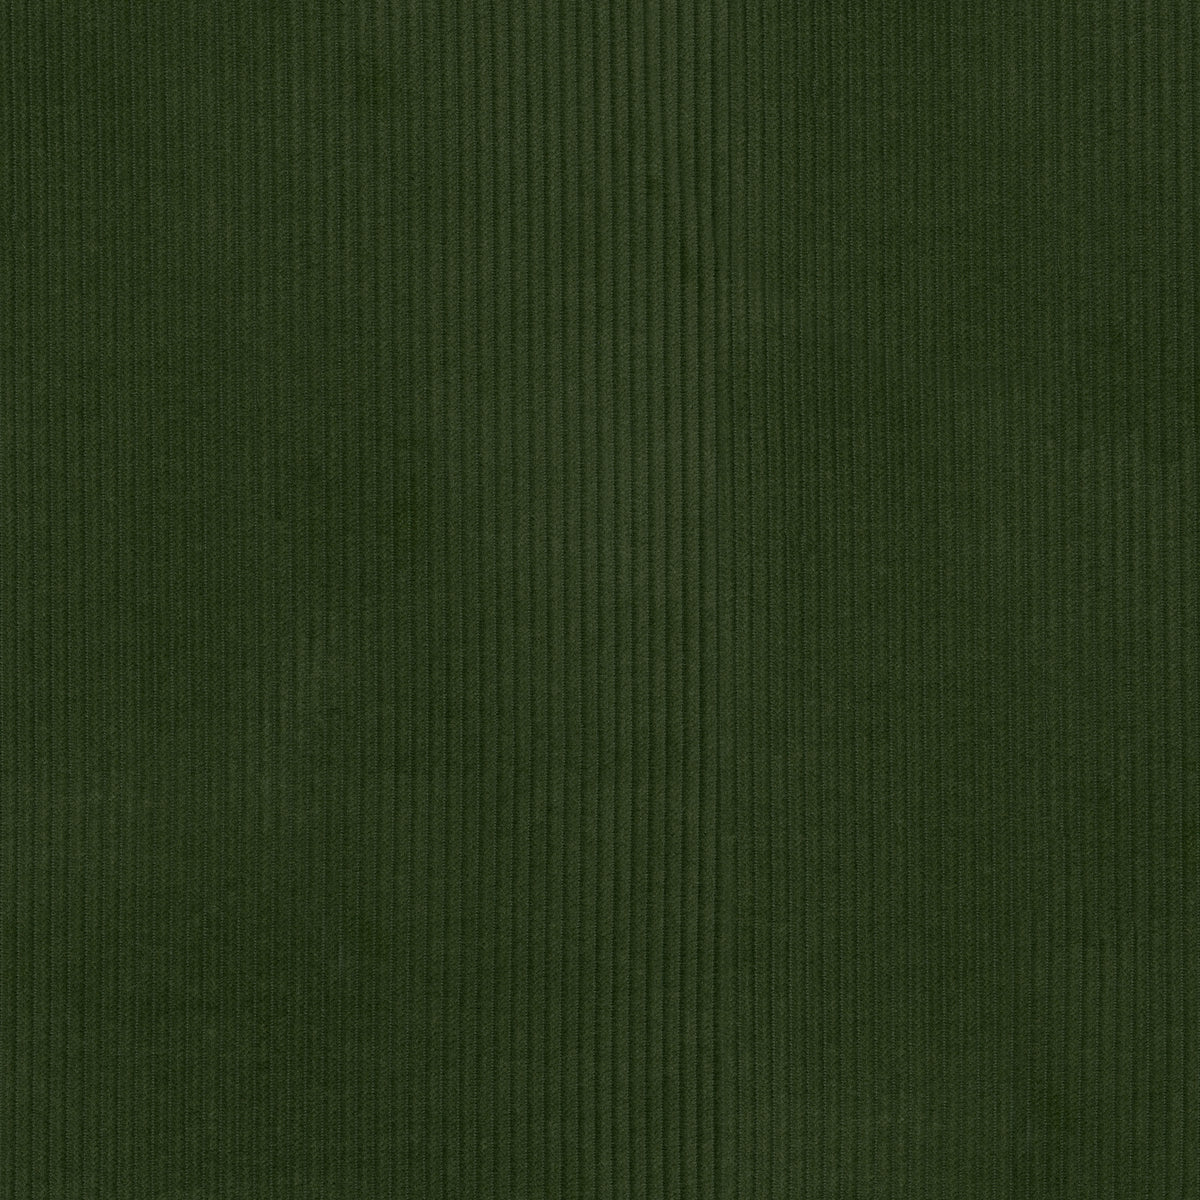 P/K Lifestyles Wales - Evergreen 412020 Upholstery Fabric